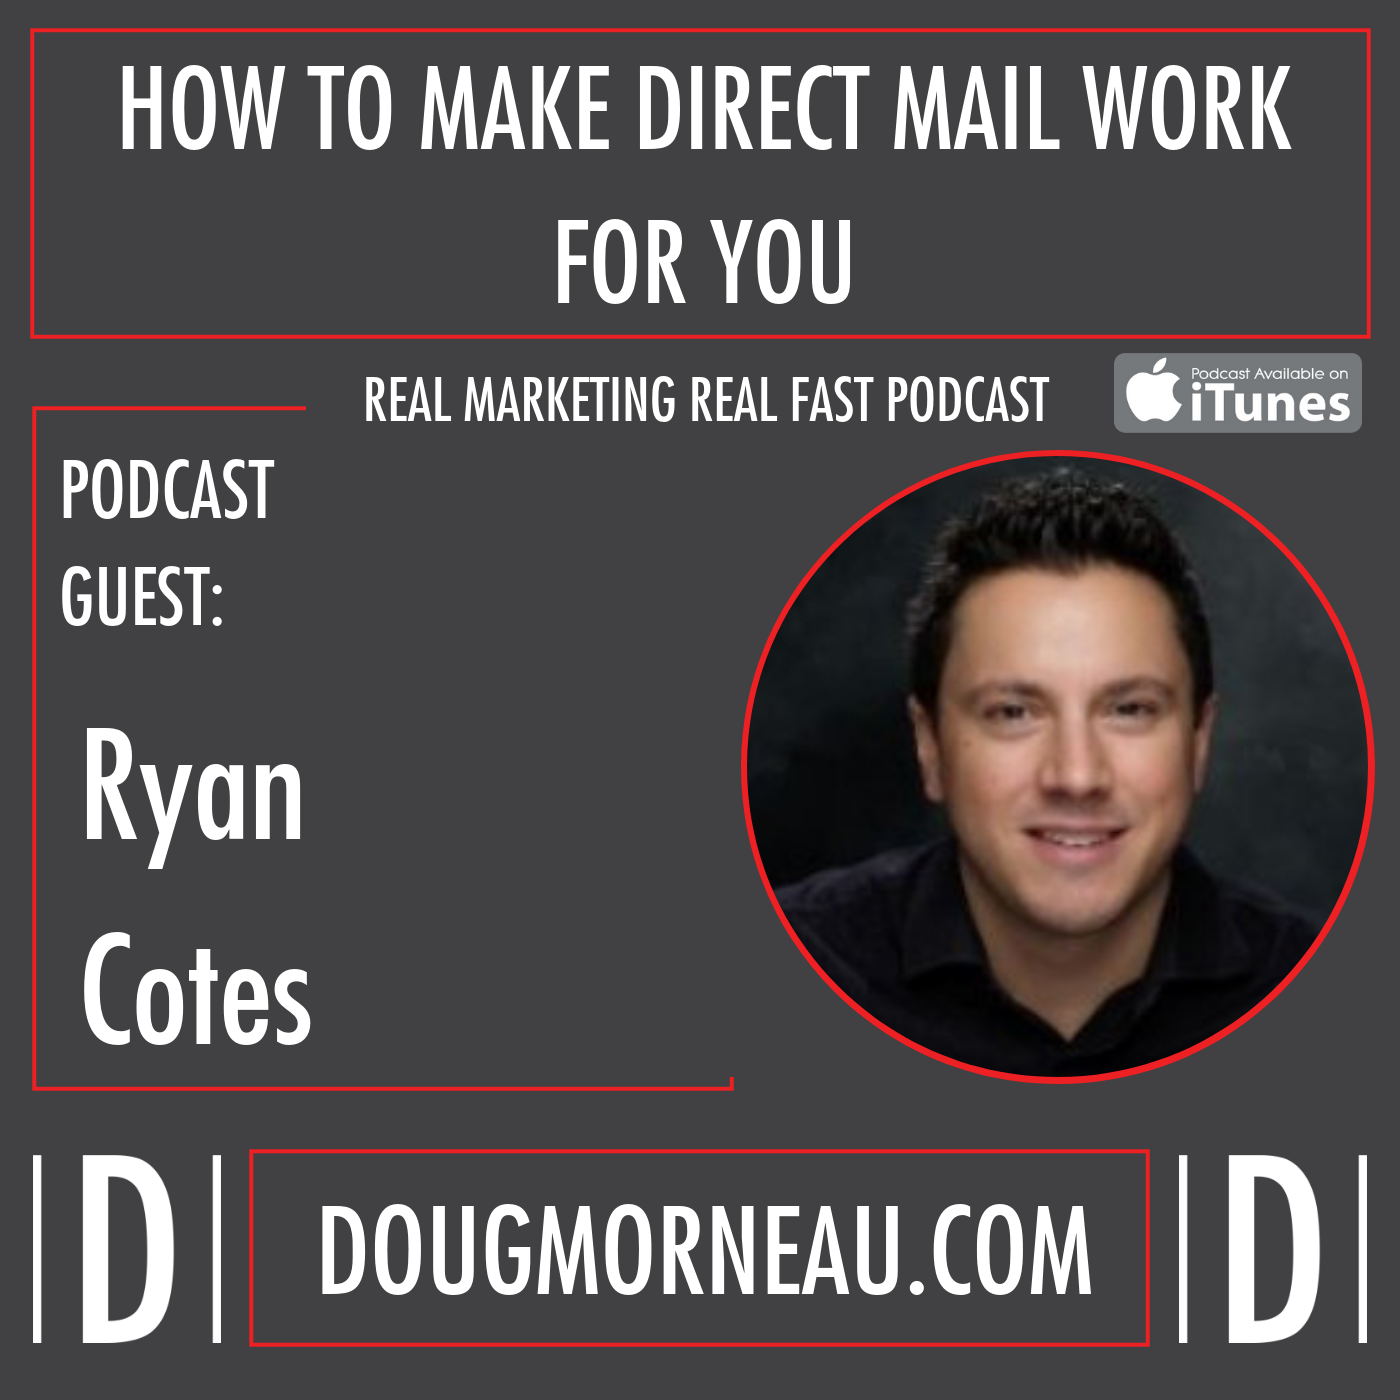 HOW TO MAKE DIRECT MAIL WORK FOR YOU RYAN COTE - DOUG MORNEAU - REAL MARKETING REAL FAST PODCAST